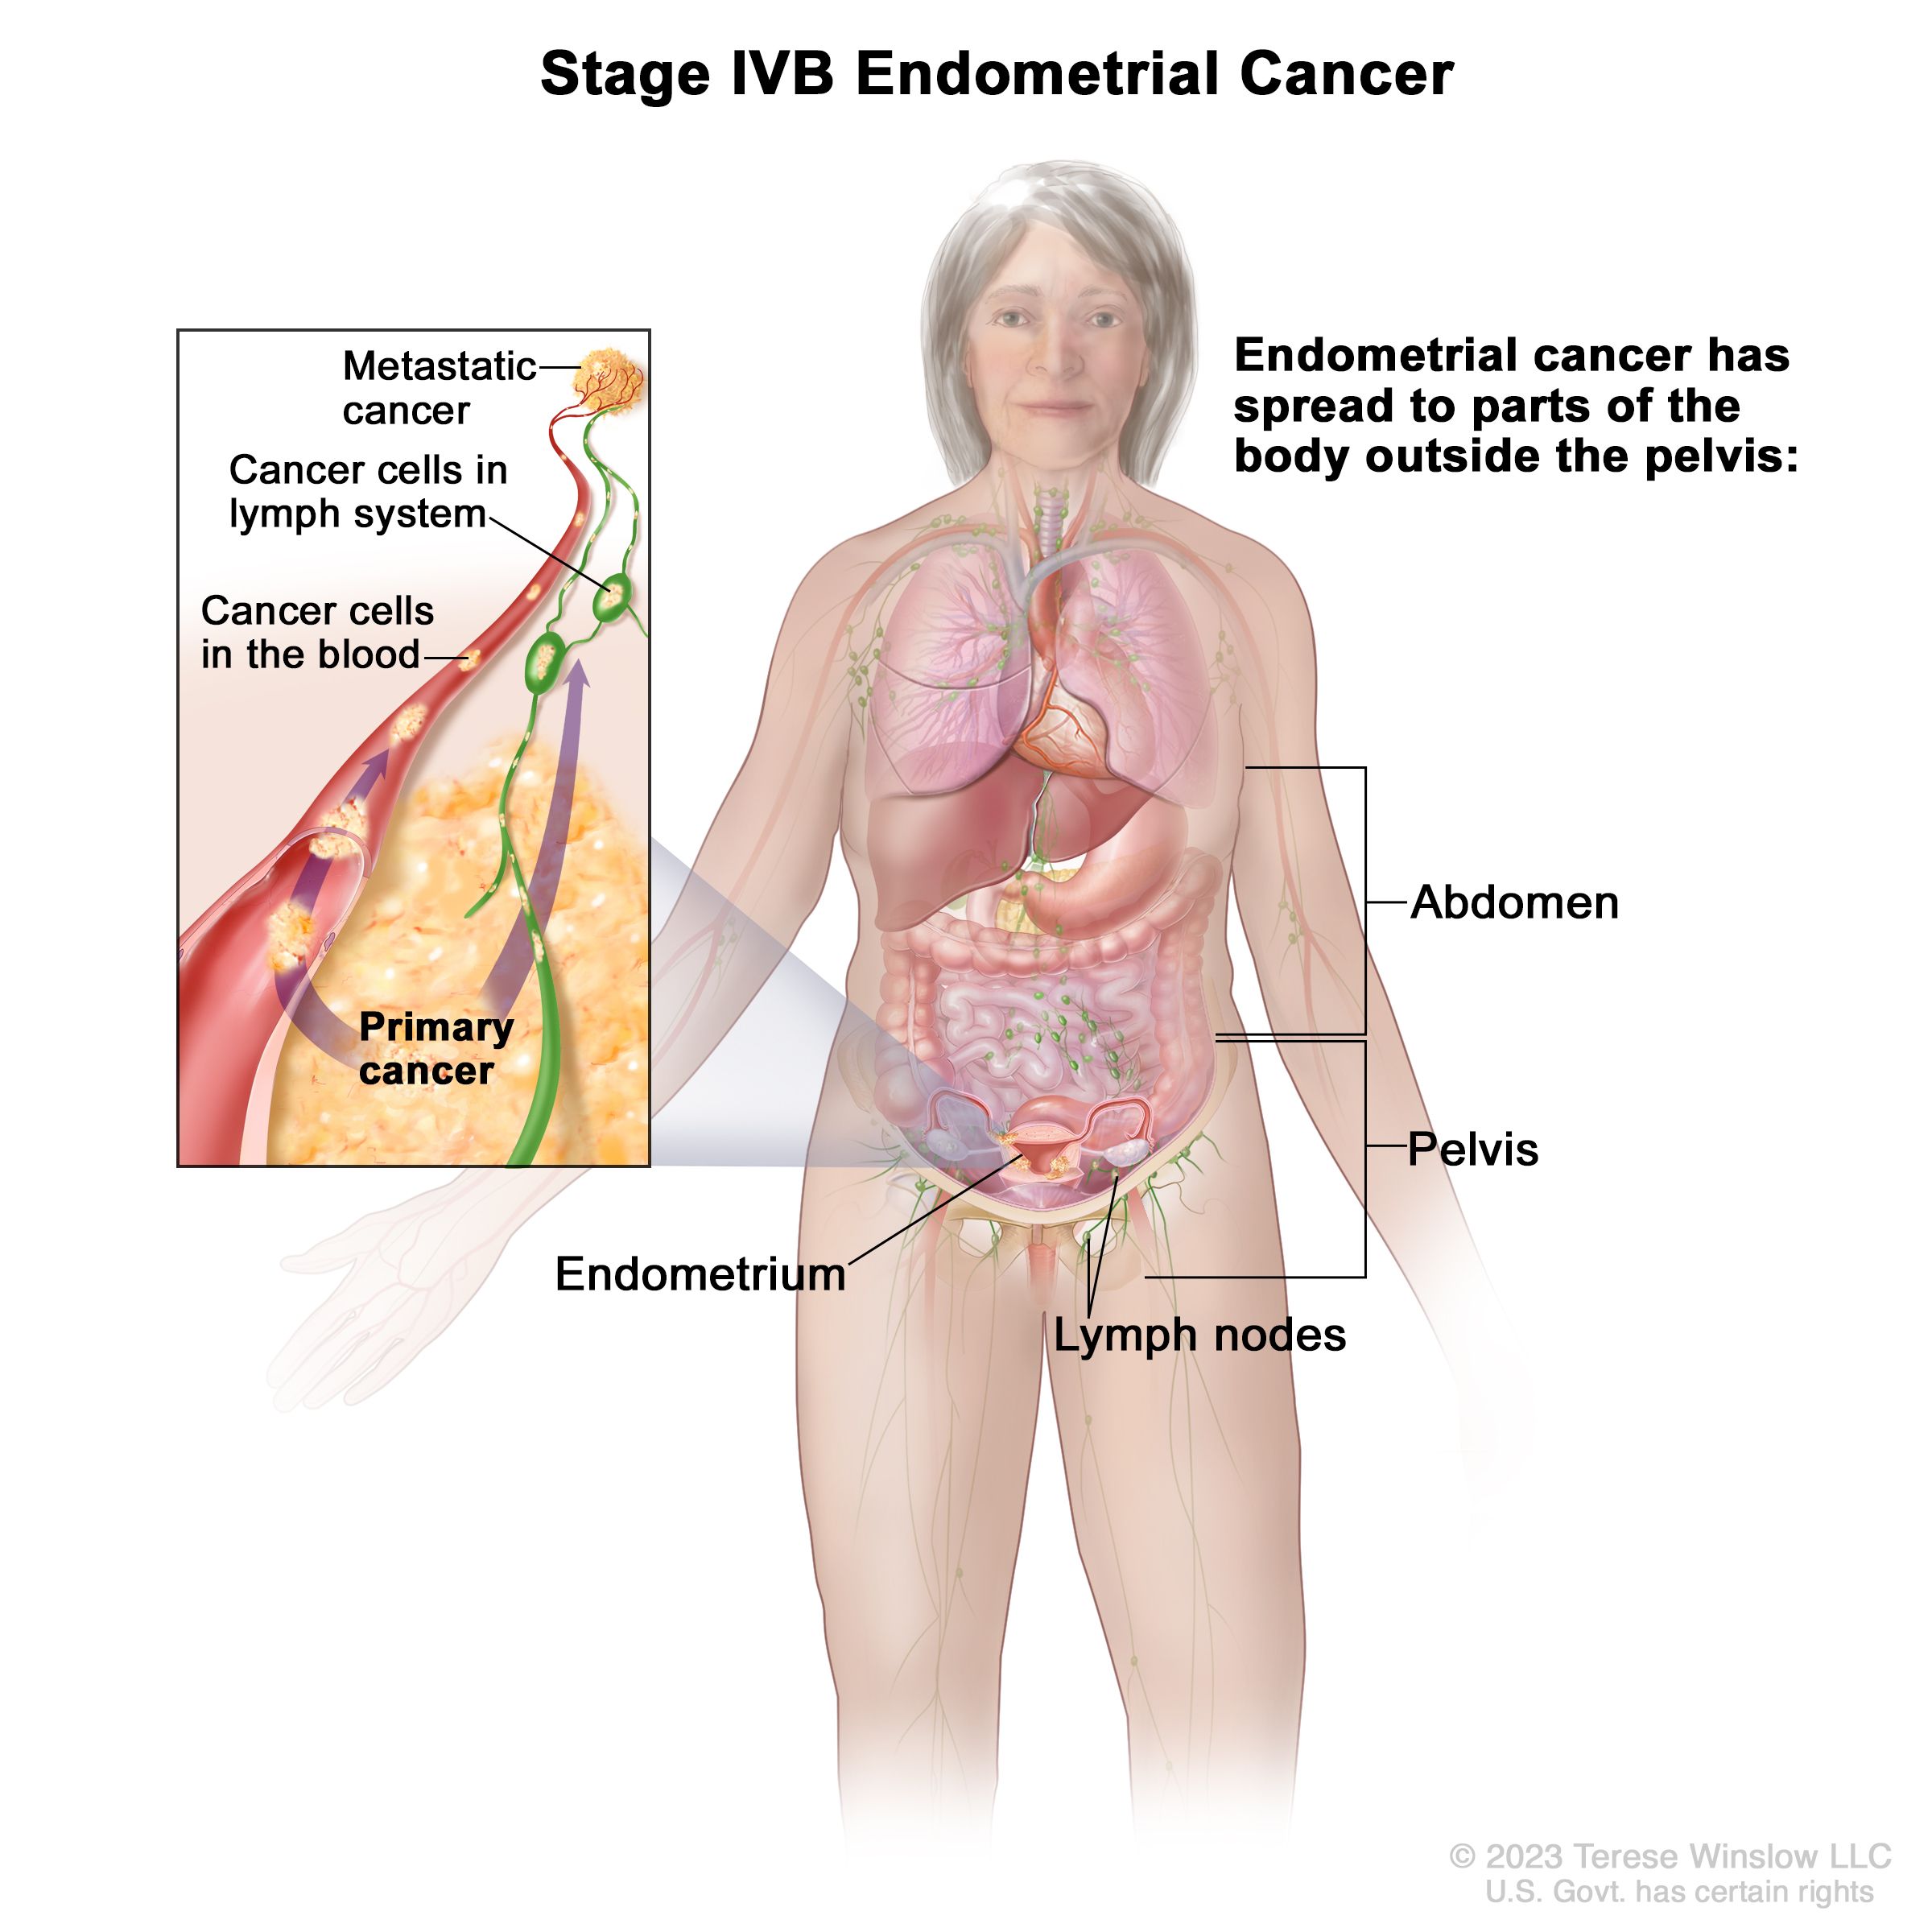 Endometrial cancer recurrence after hysterectomy